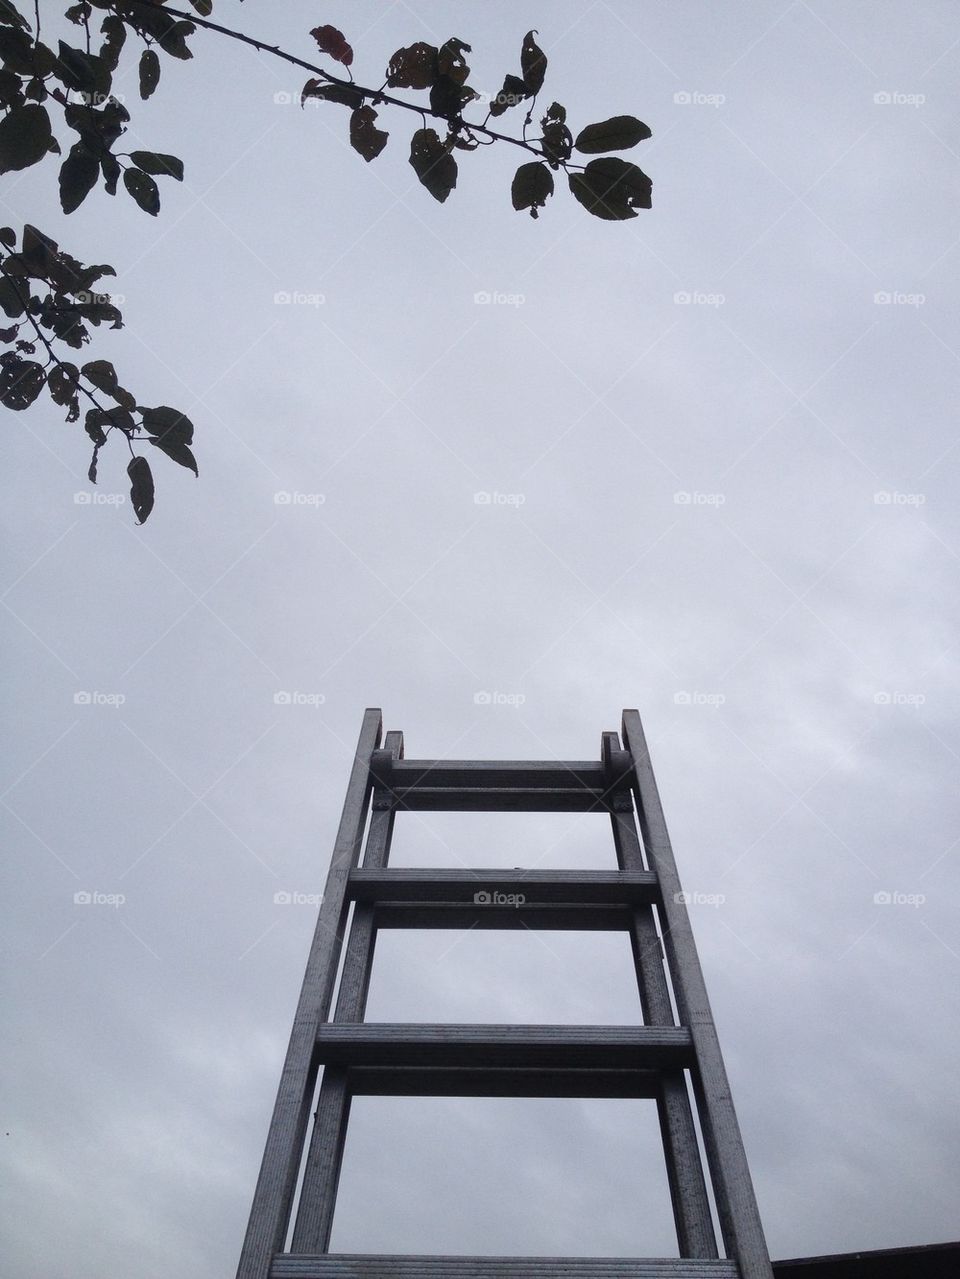 Simply a ladder